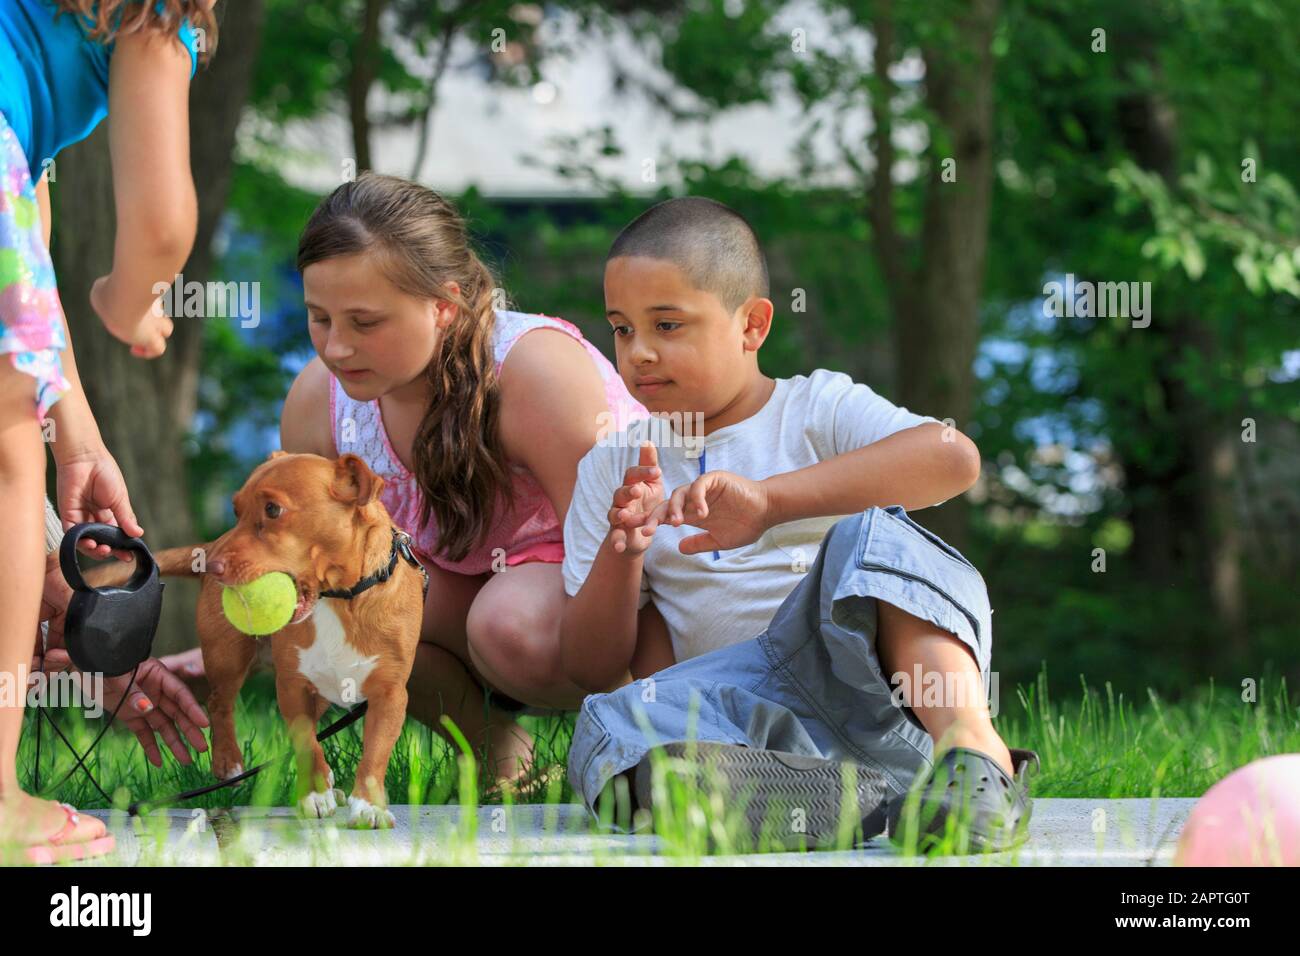 Children playing with a dog outside Stock Photo